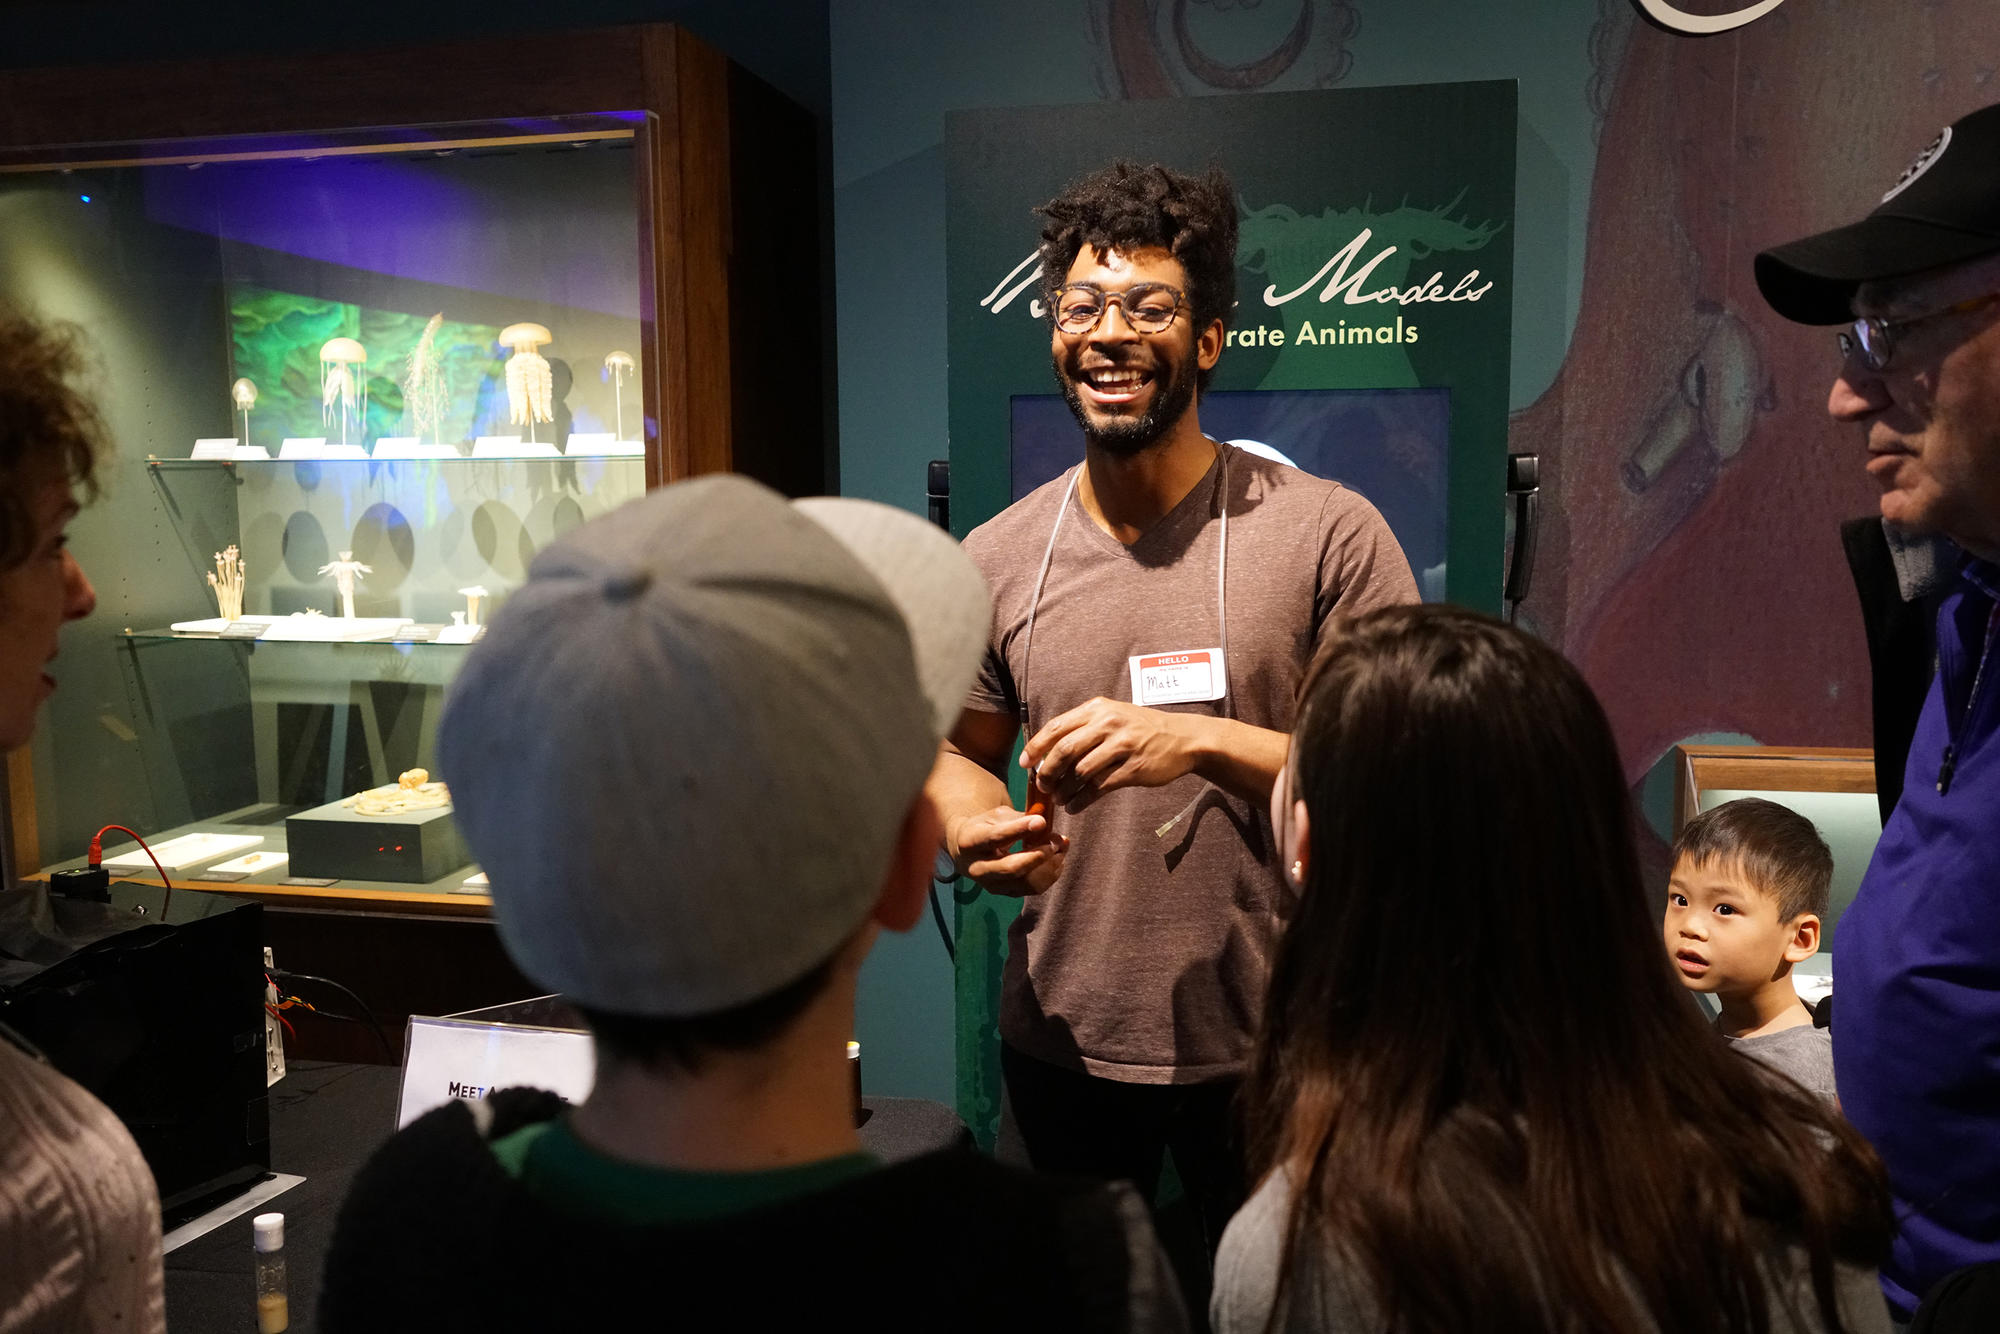 A man talking to a group with kids and adults in the Sea Creatures Gallery.